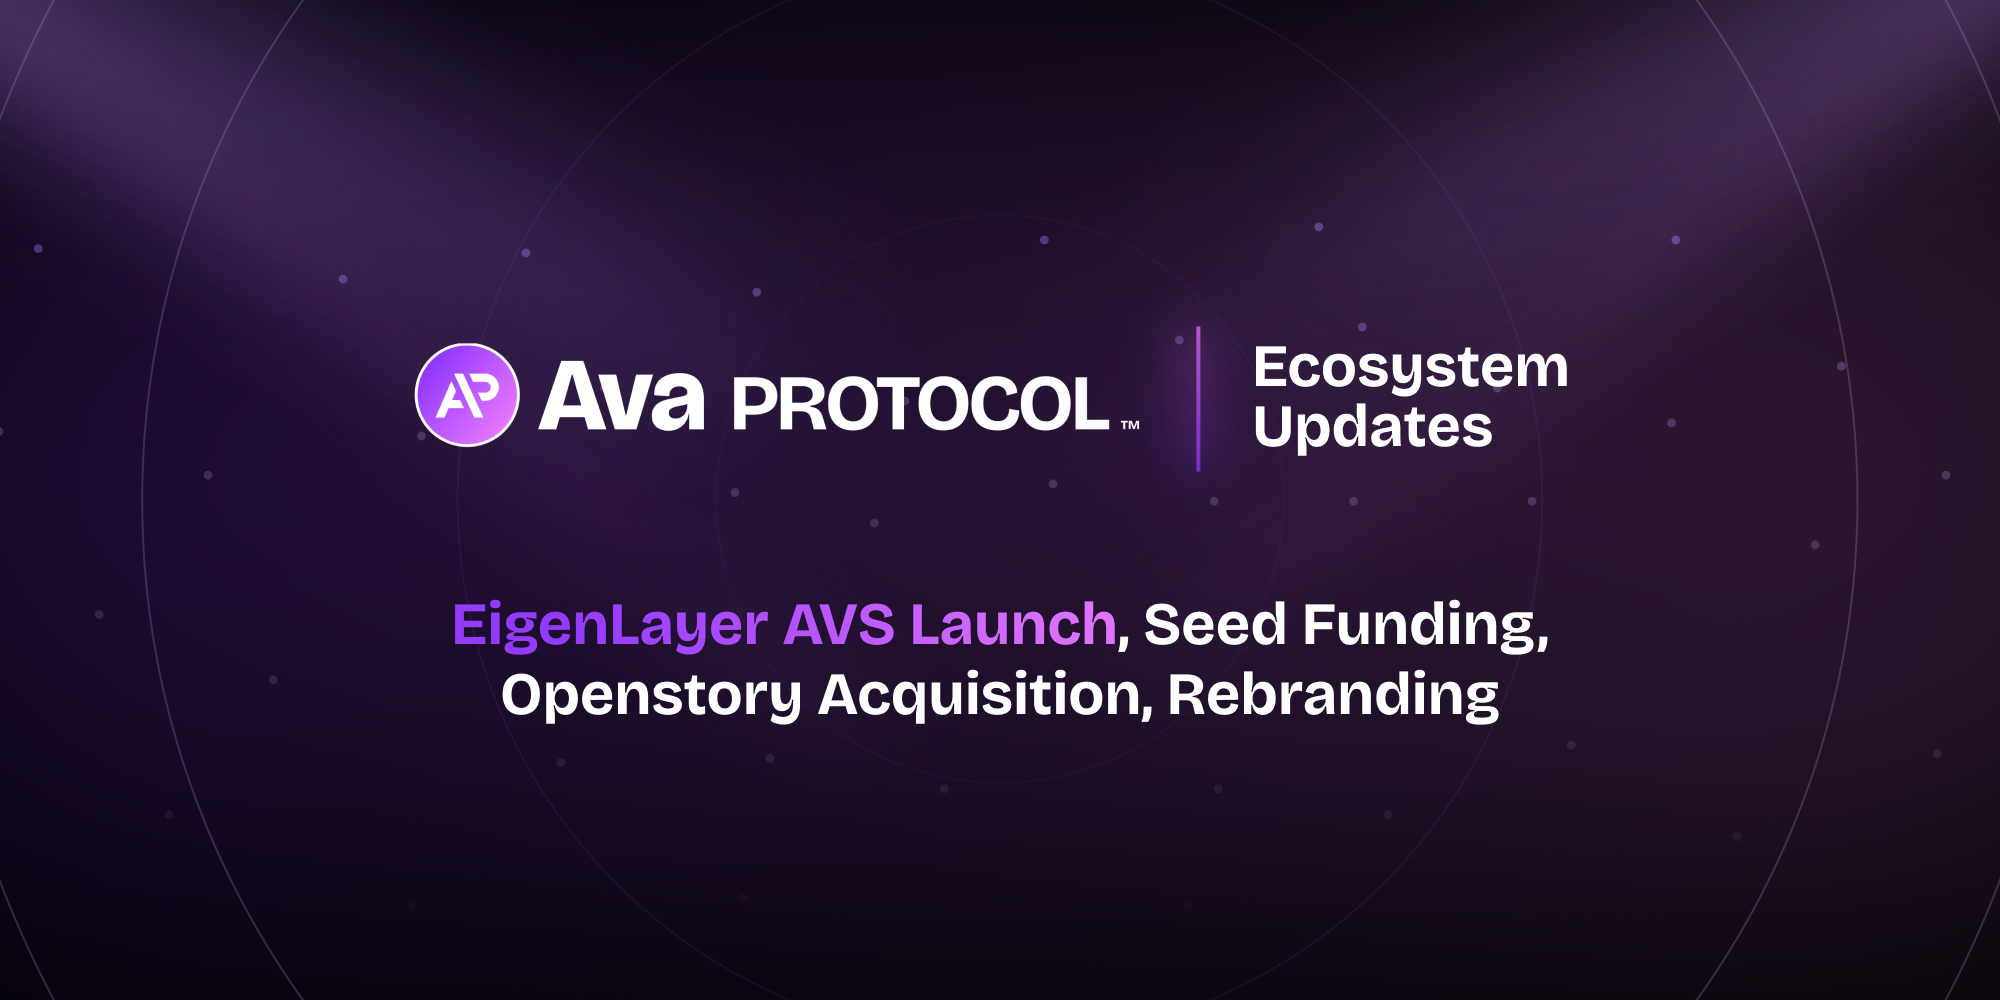 Ava Protocol Ecosystem Updates. The image features the Ava Protocol logo followed by the text "Ecosystem Updates" on the right. Below, the text reads "EigenLayer AVS Launch, Seed Funding, Openstory Acquisition, Rebranding" on a dark purple background with subtle circular patterns and small dot accents.